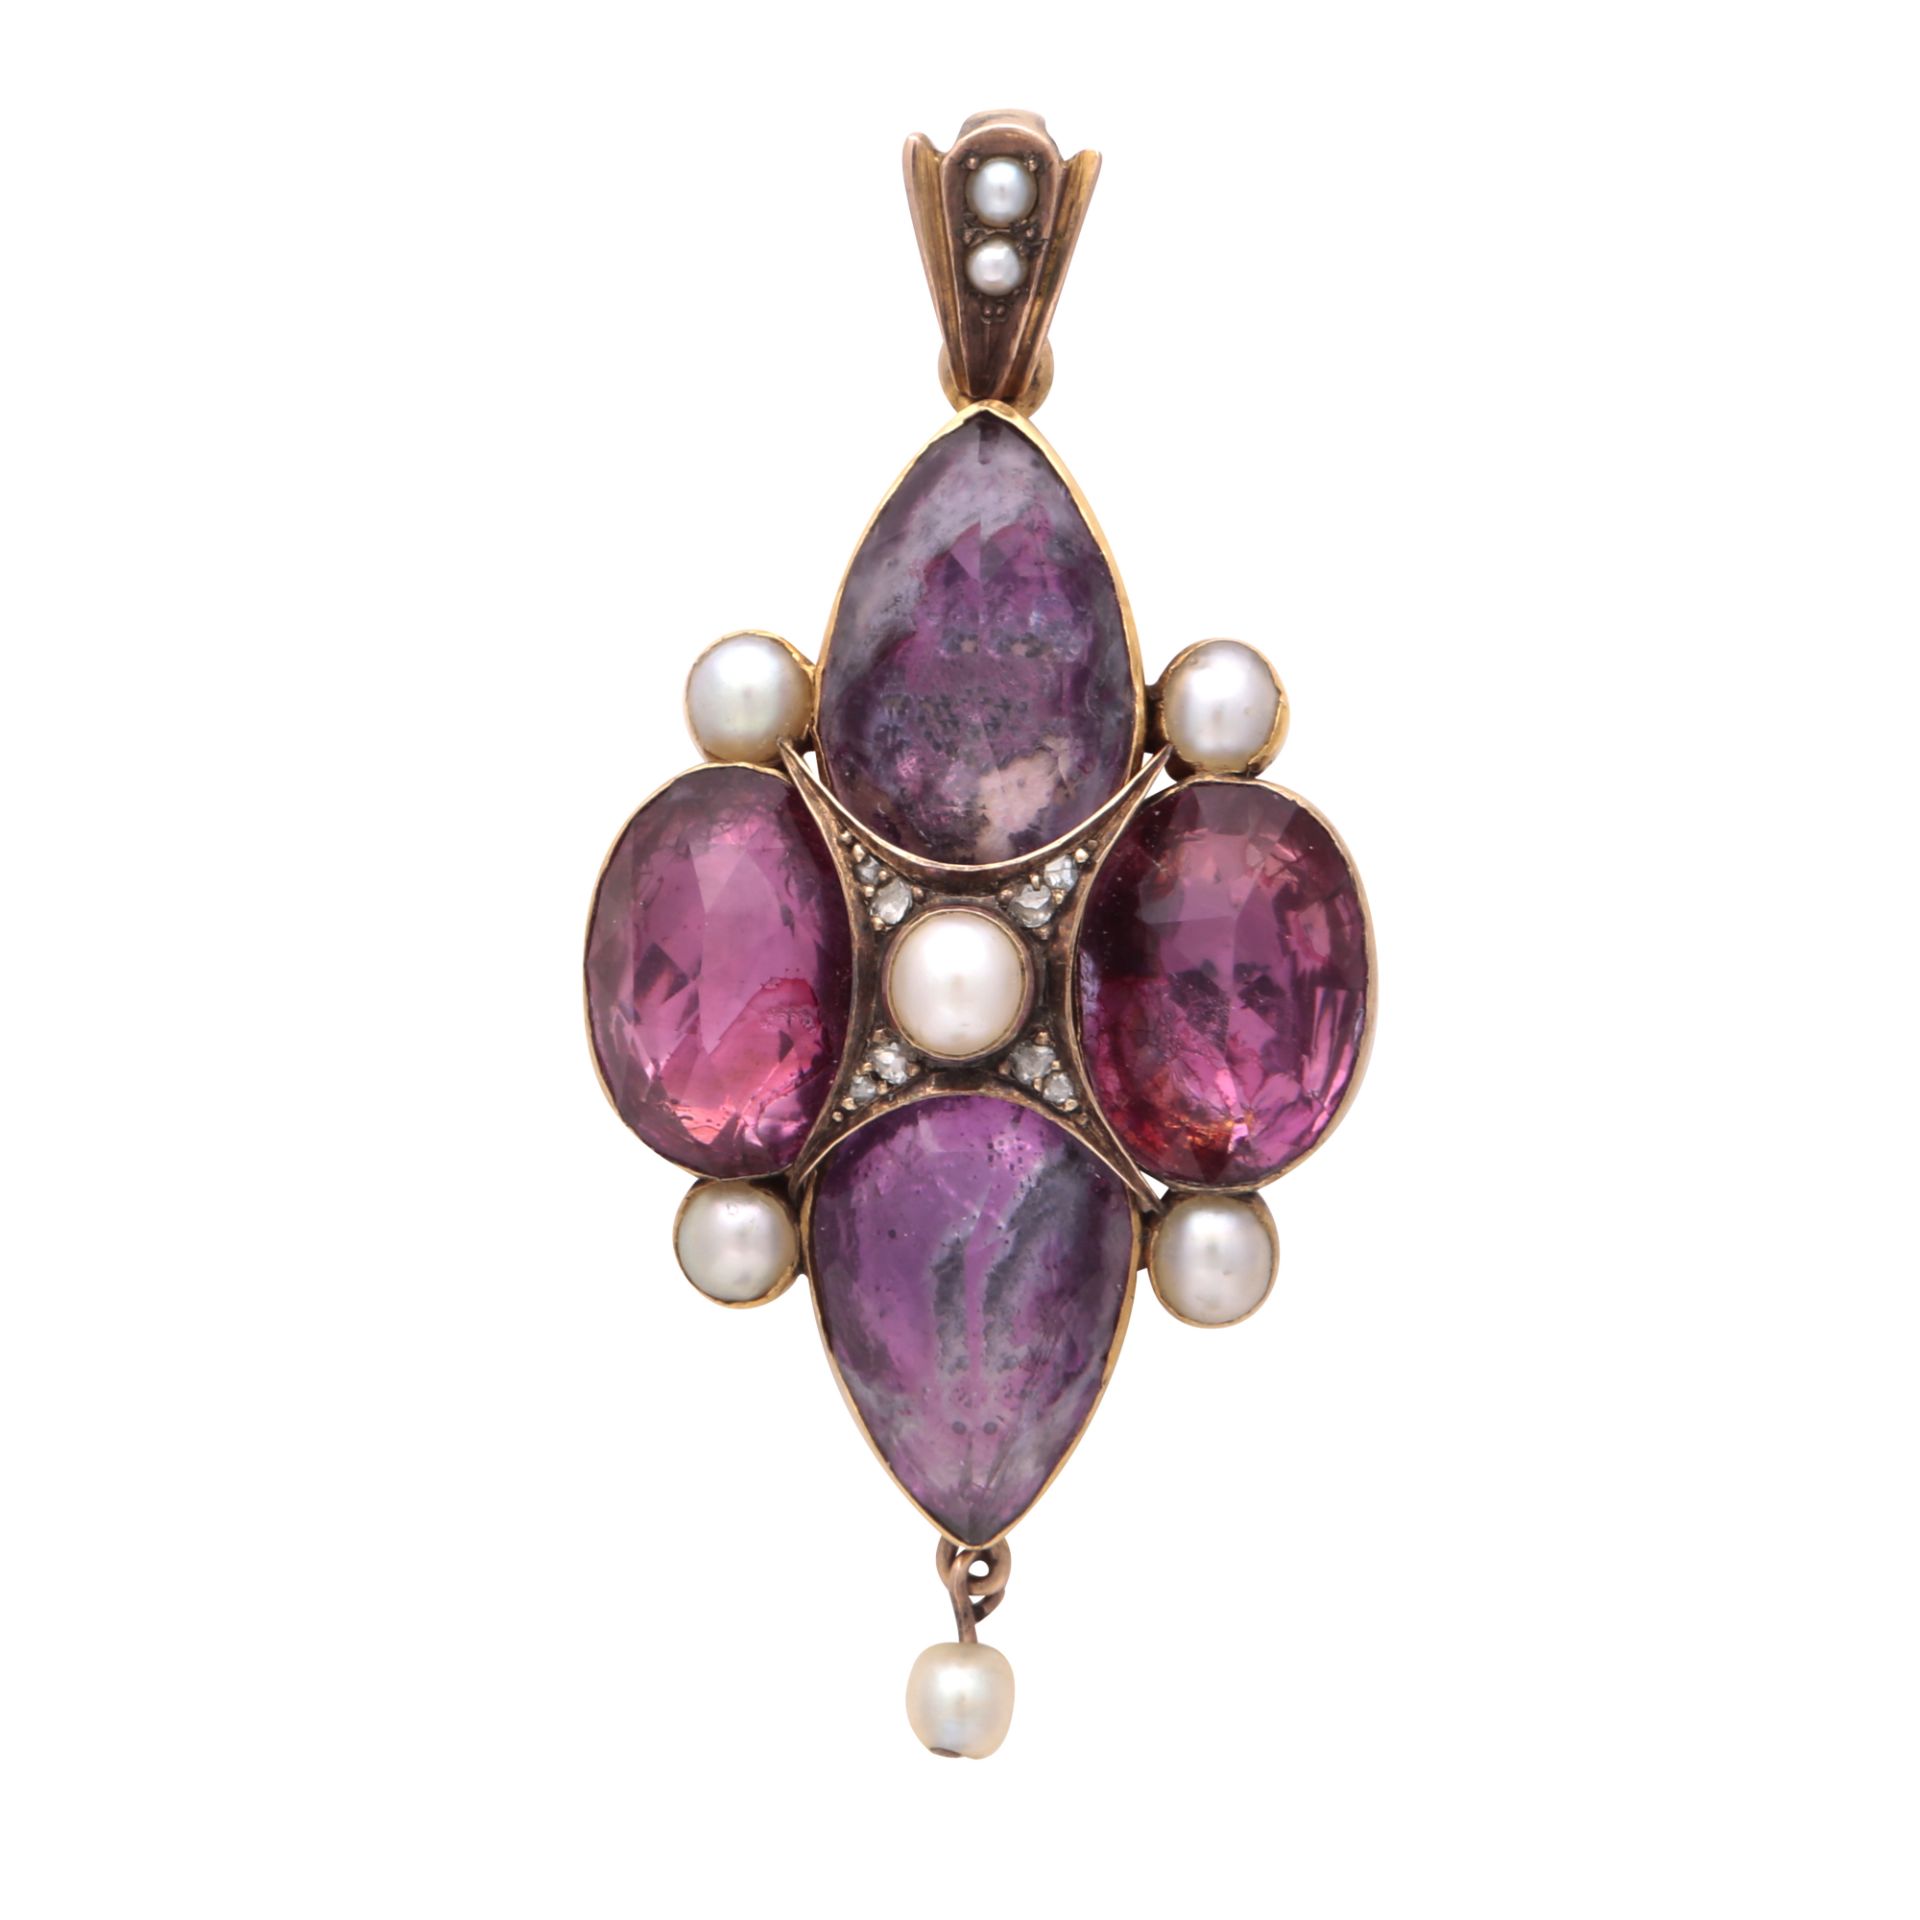 An antique Georgian pink tourmaline / topaz, pearl and diamond pendant set with four large variously